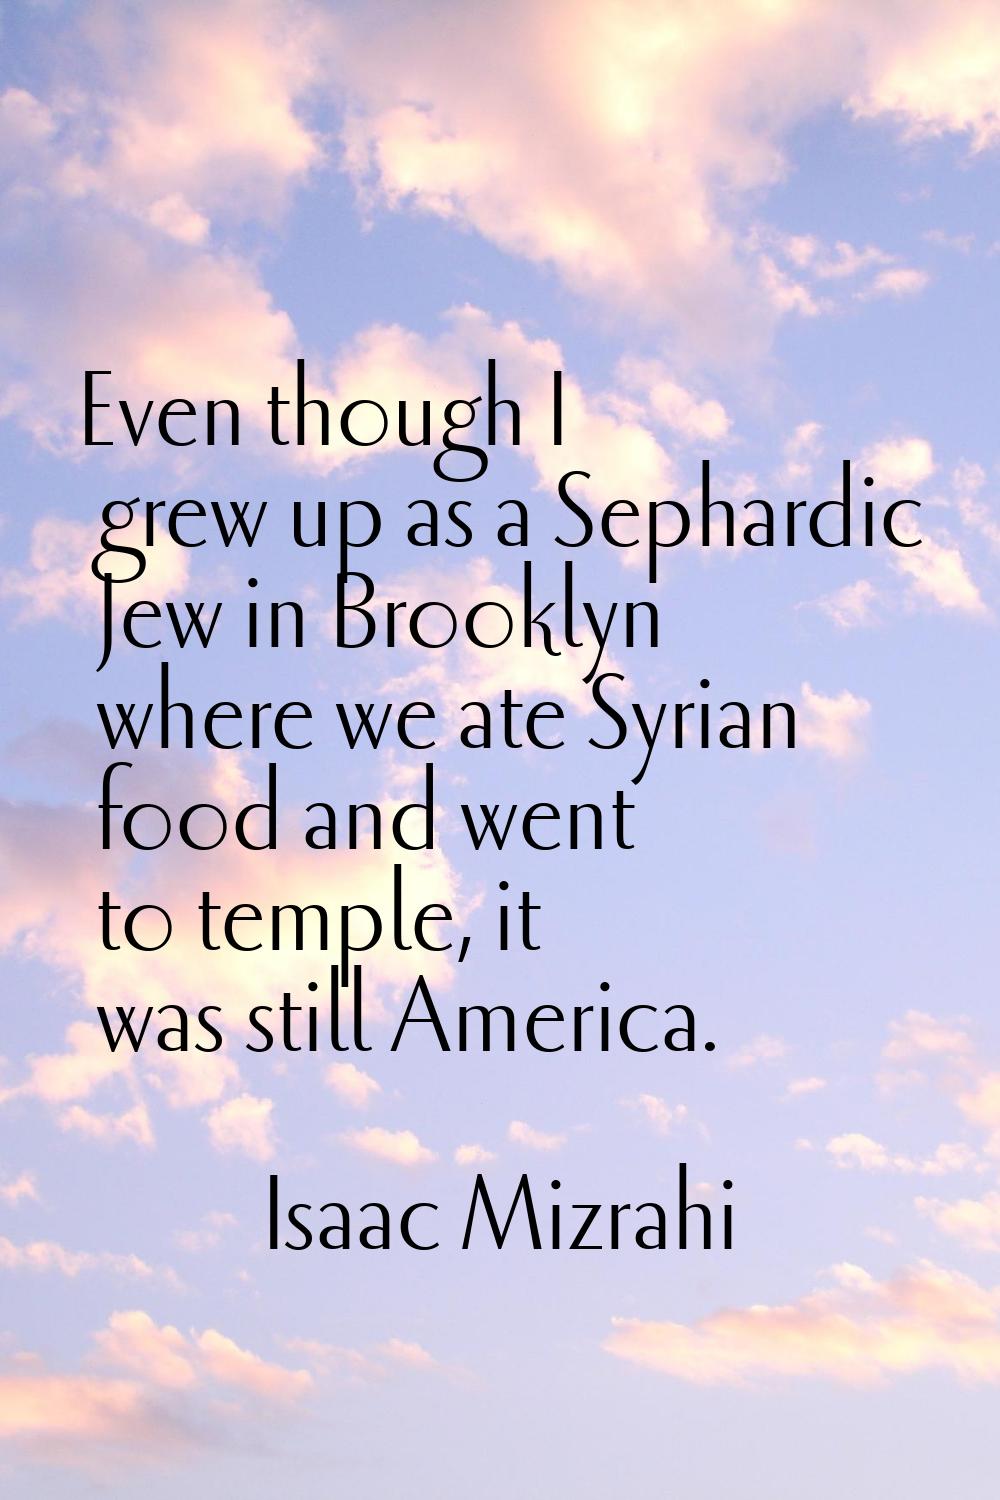 Even though I grew up as a Sephardic Jew in Brooklyn where we ate Syrian food and went to temple, i